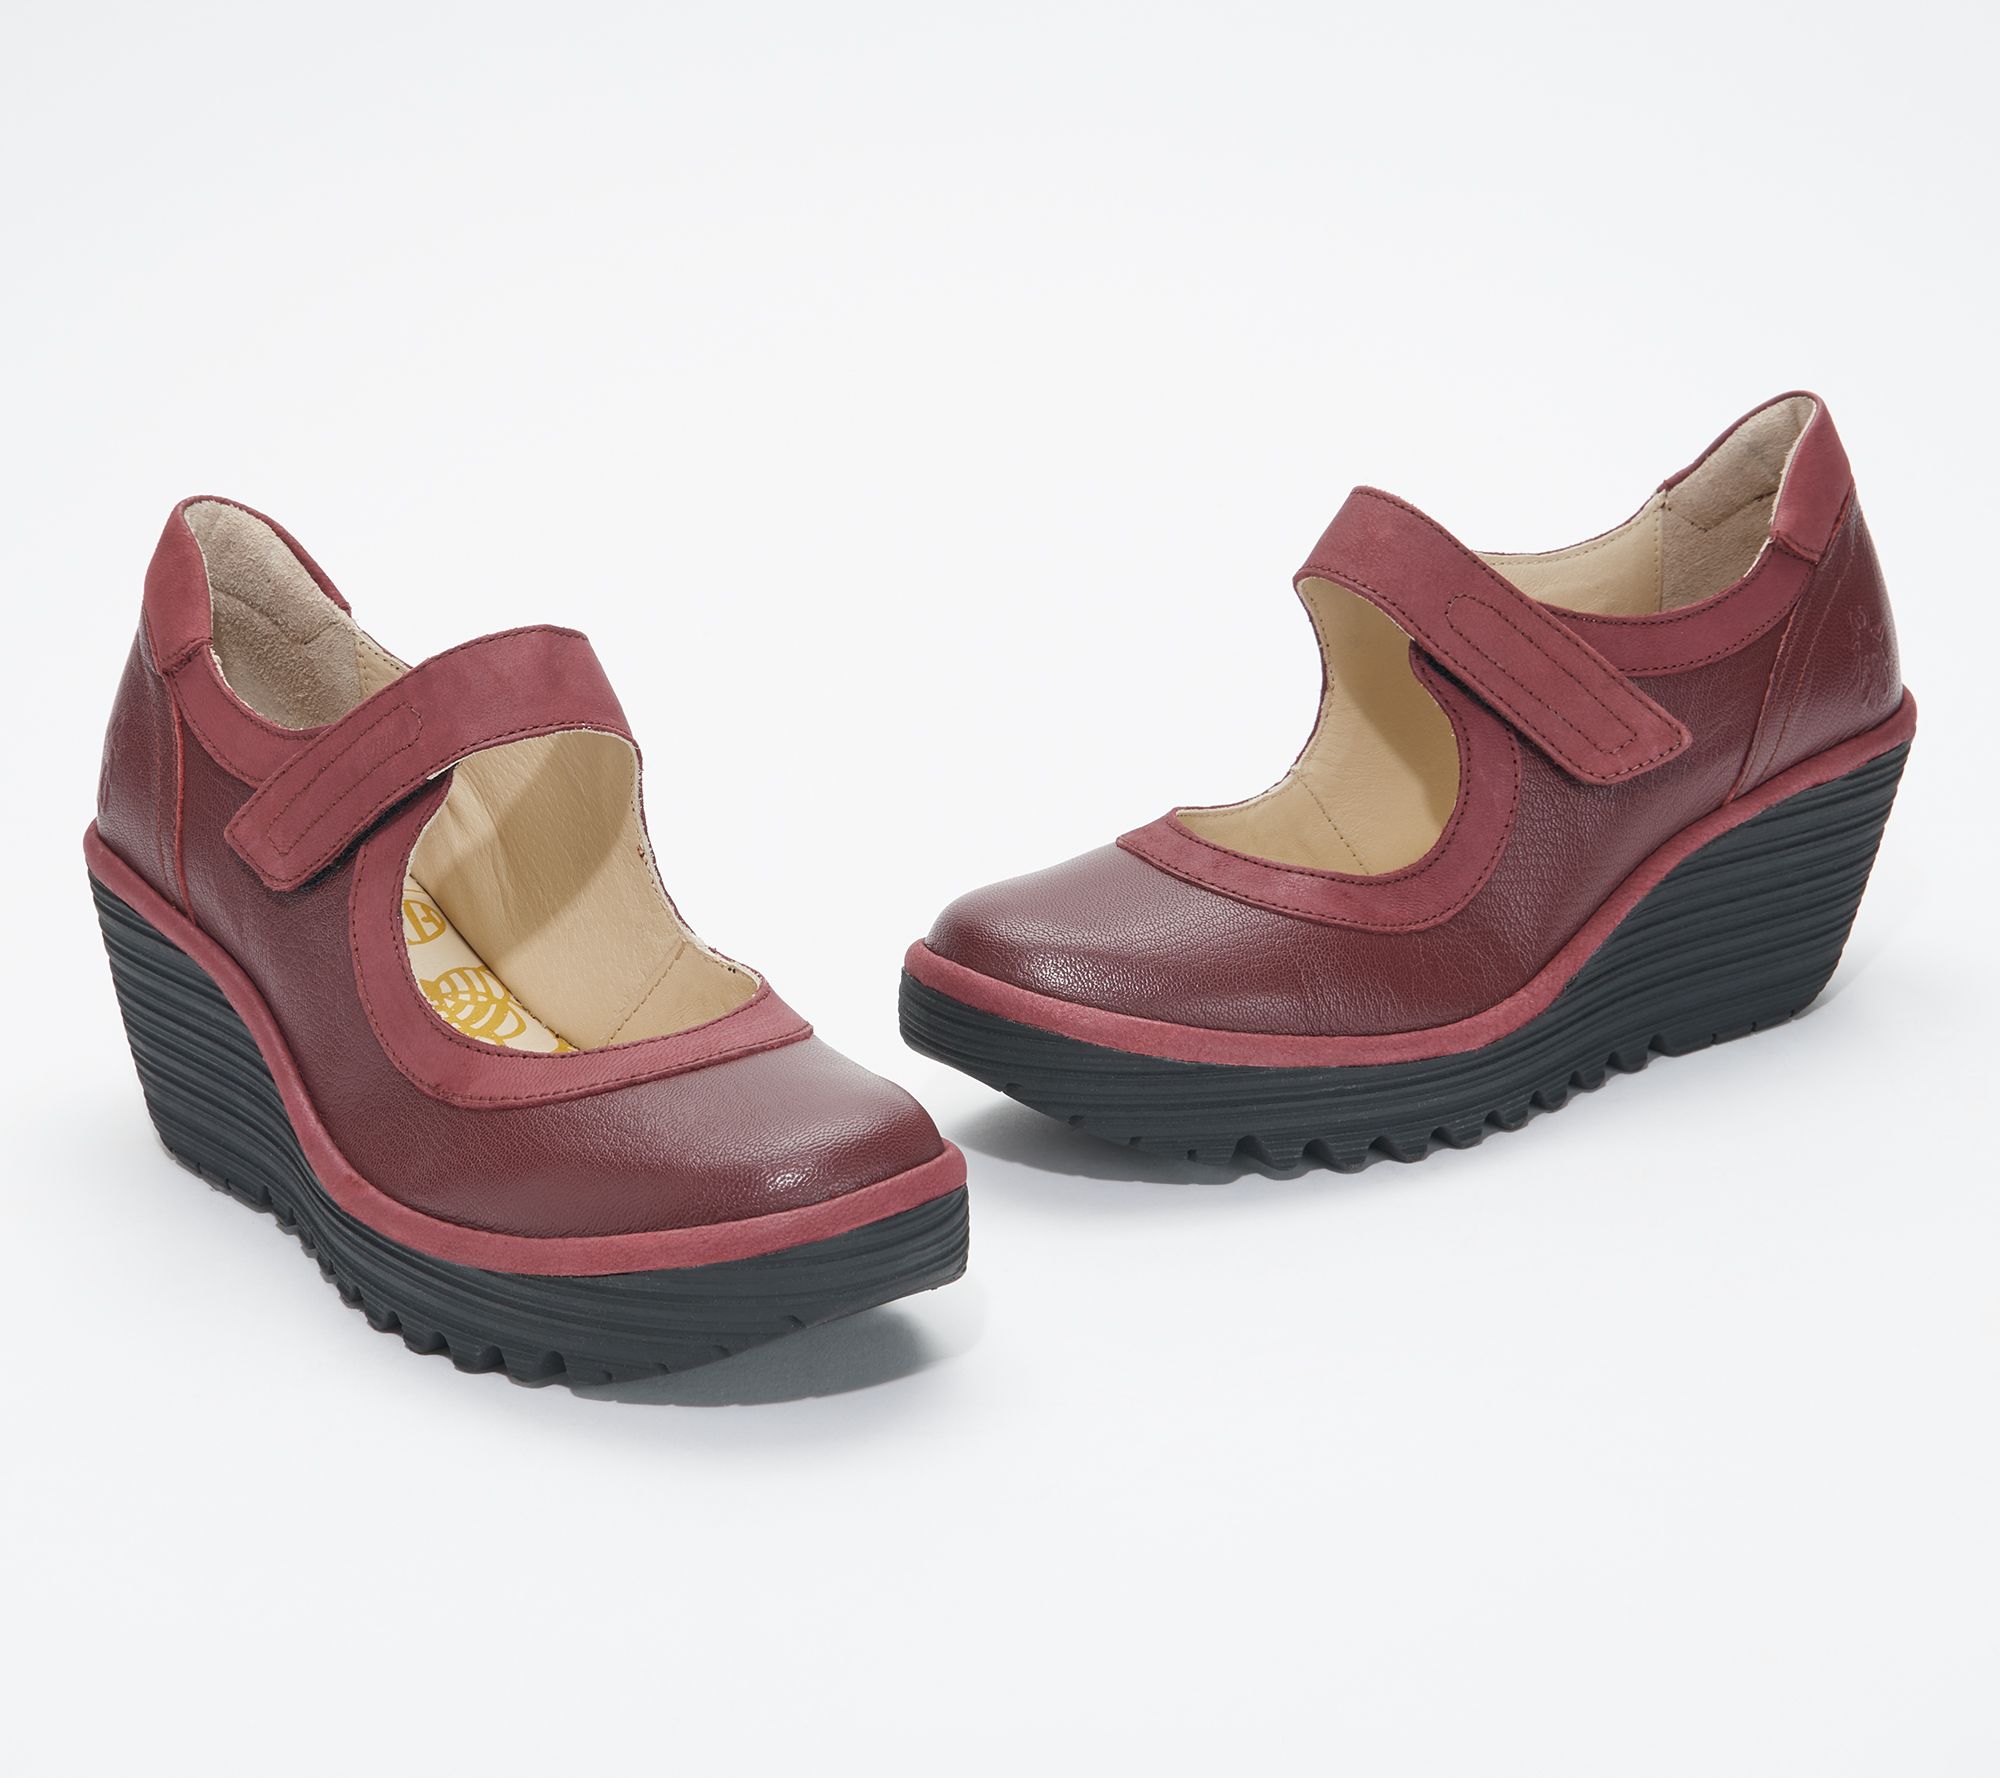 FLY London Leather Mary Jane Wedges - Yolt - QVC.com